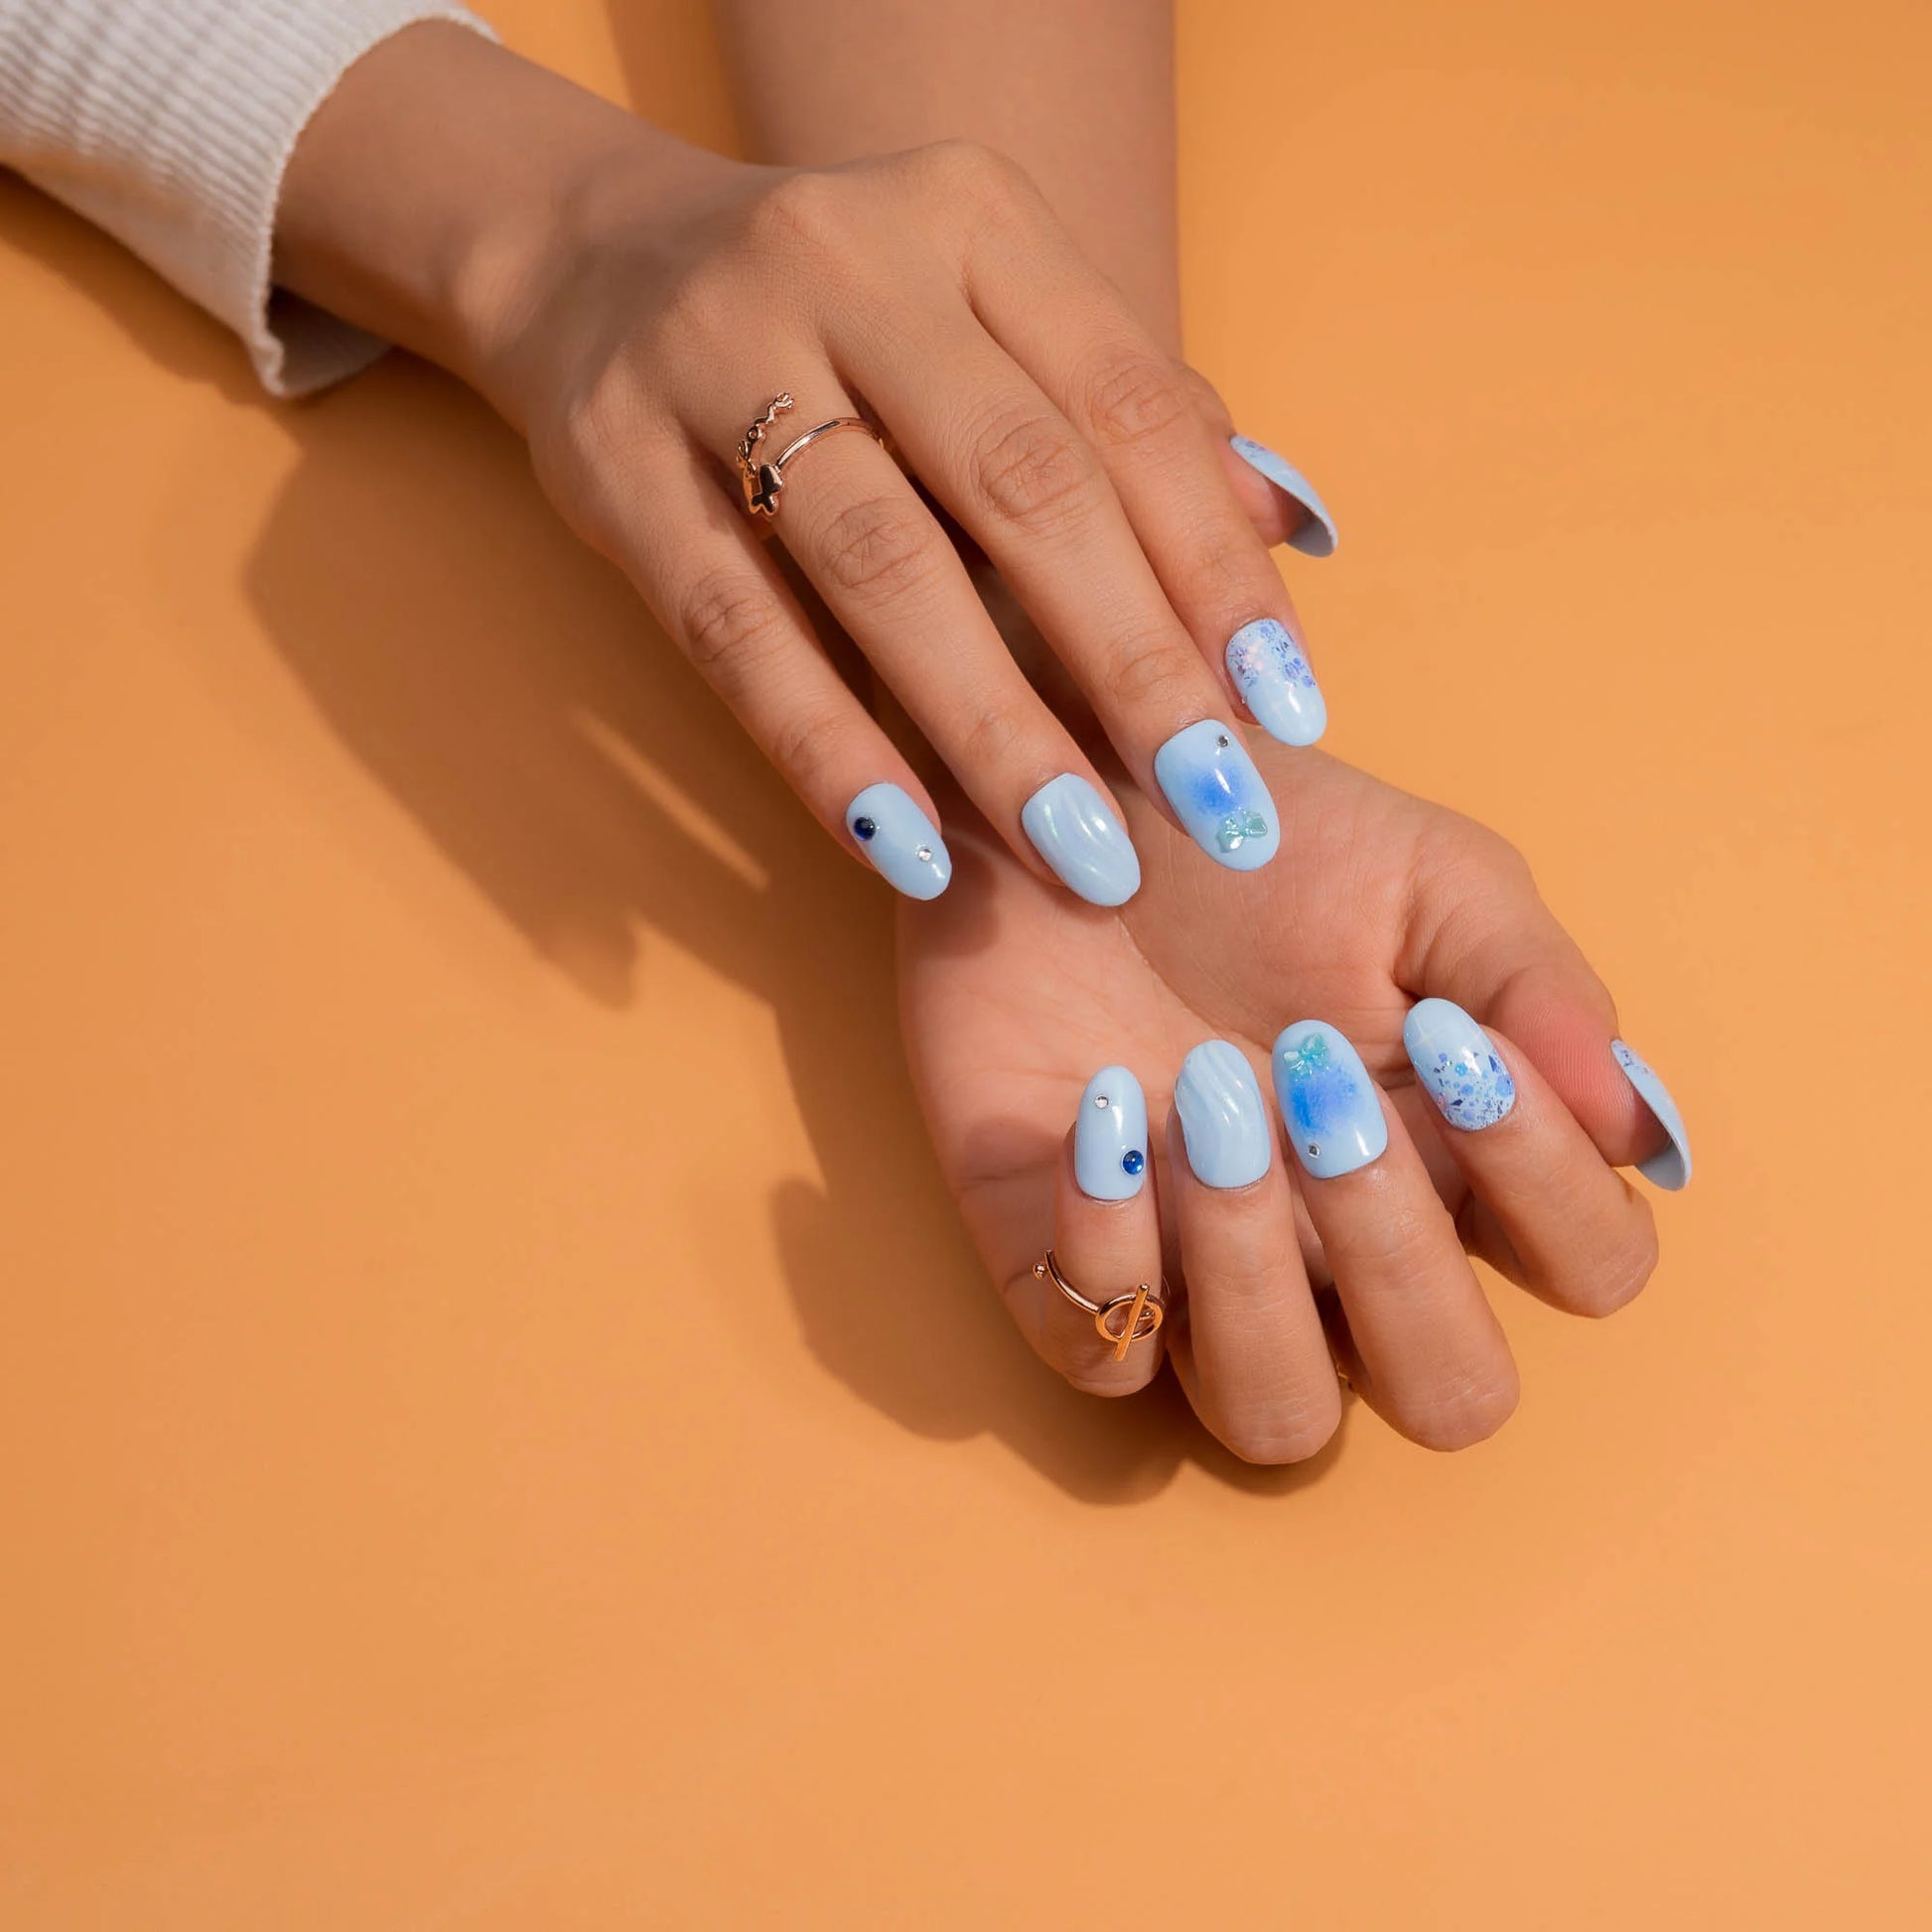 Dreamy and Glittery Sky Blue Press-On Nails